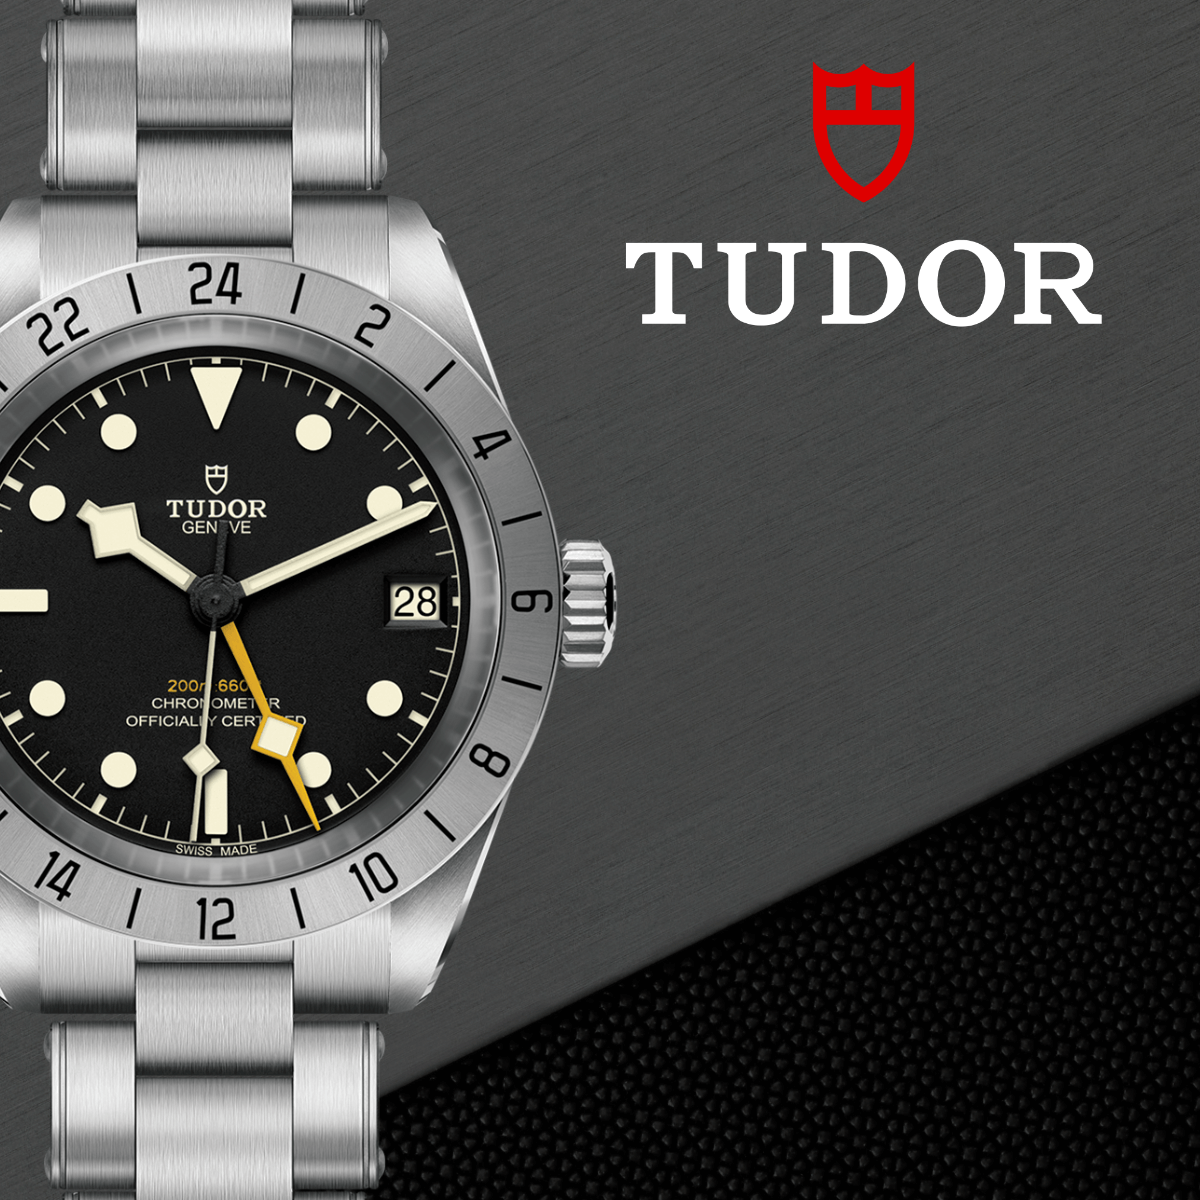 Tudor at Springer's Jewelers | New Hampshire and Maine